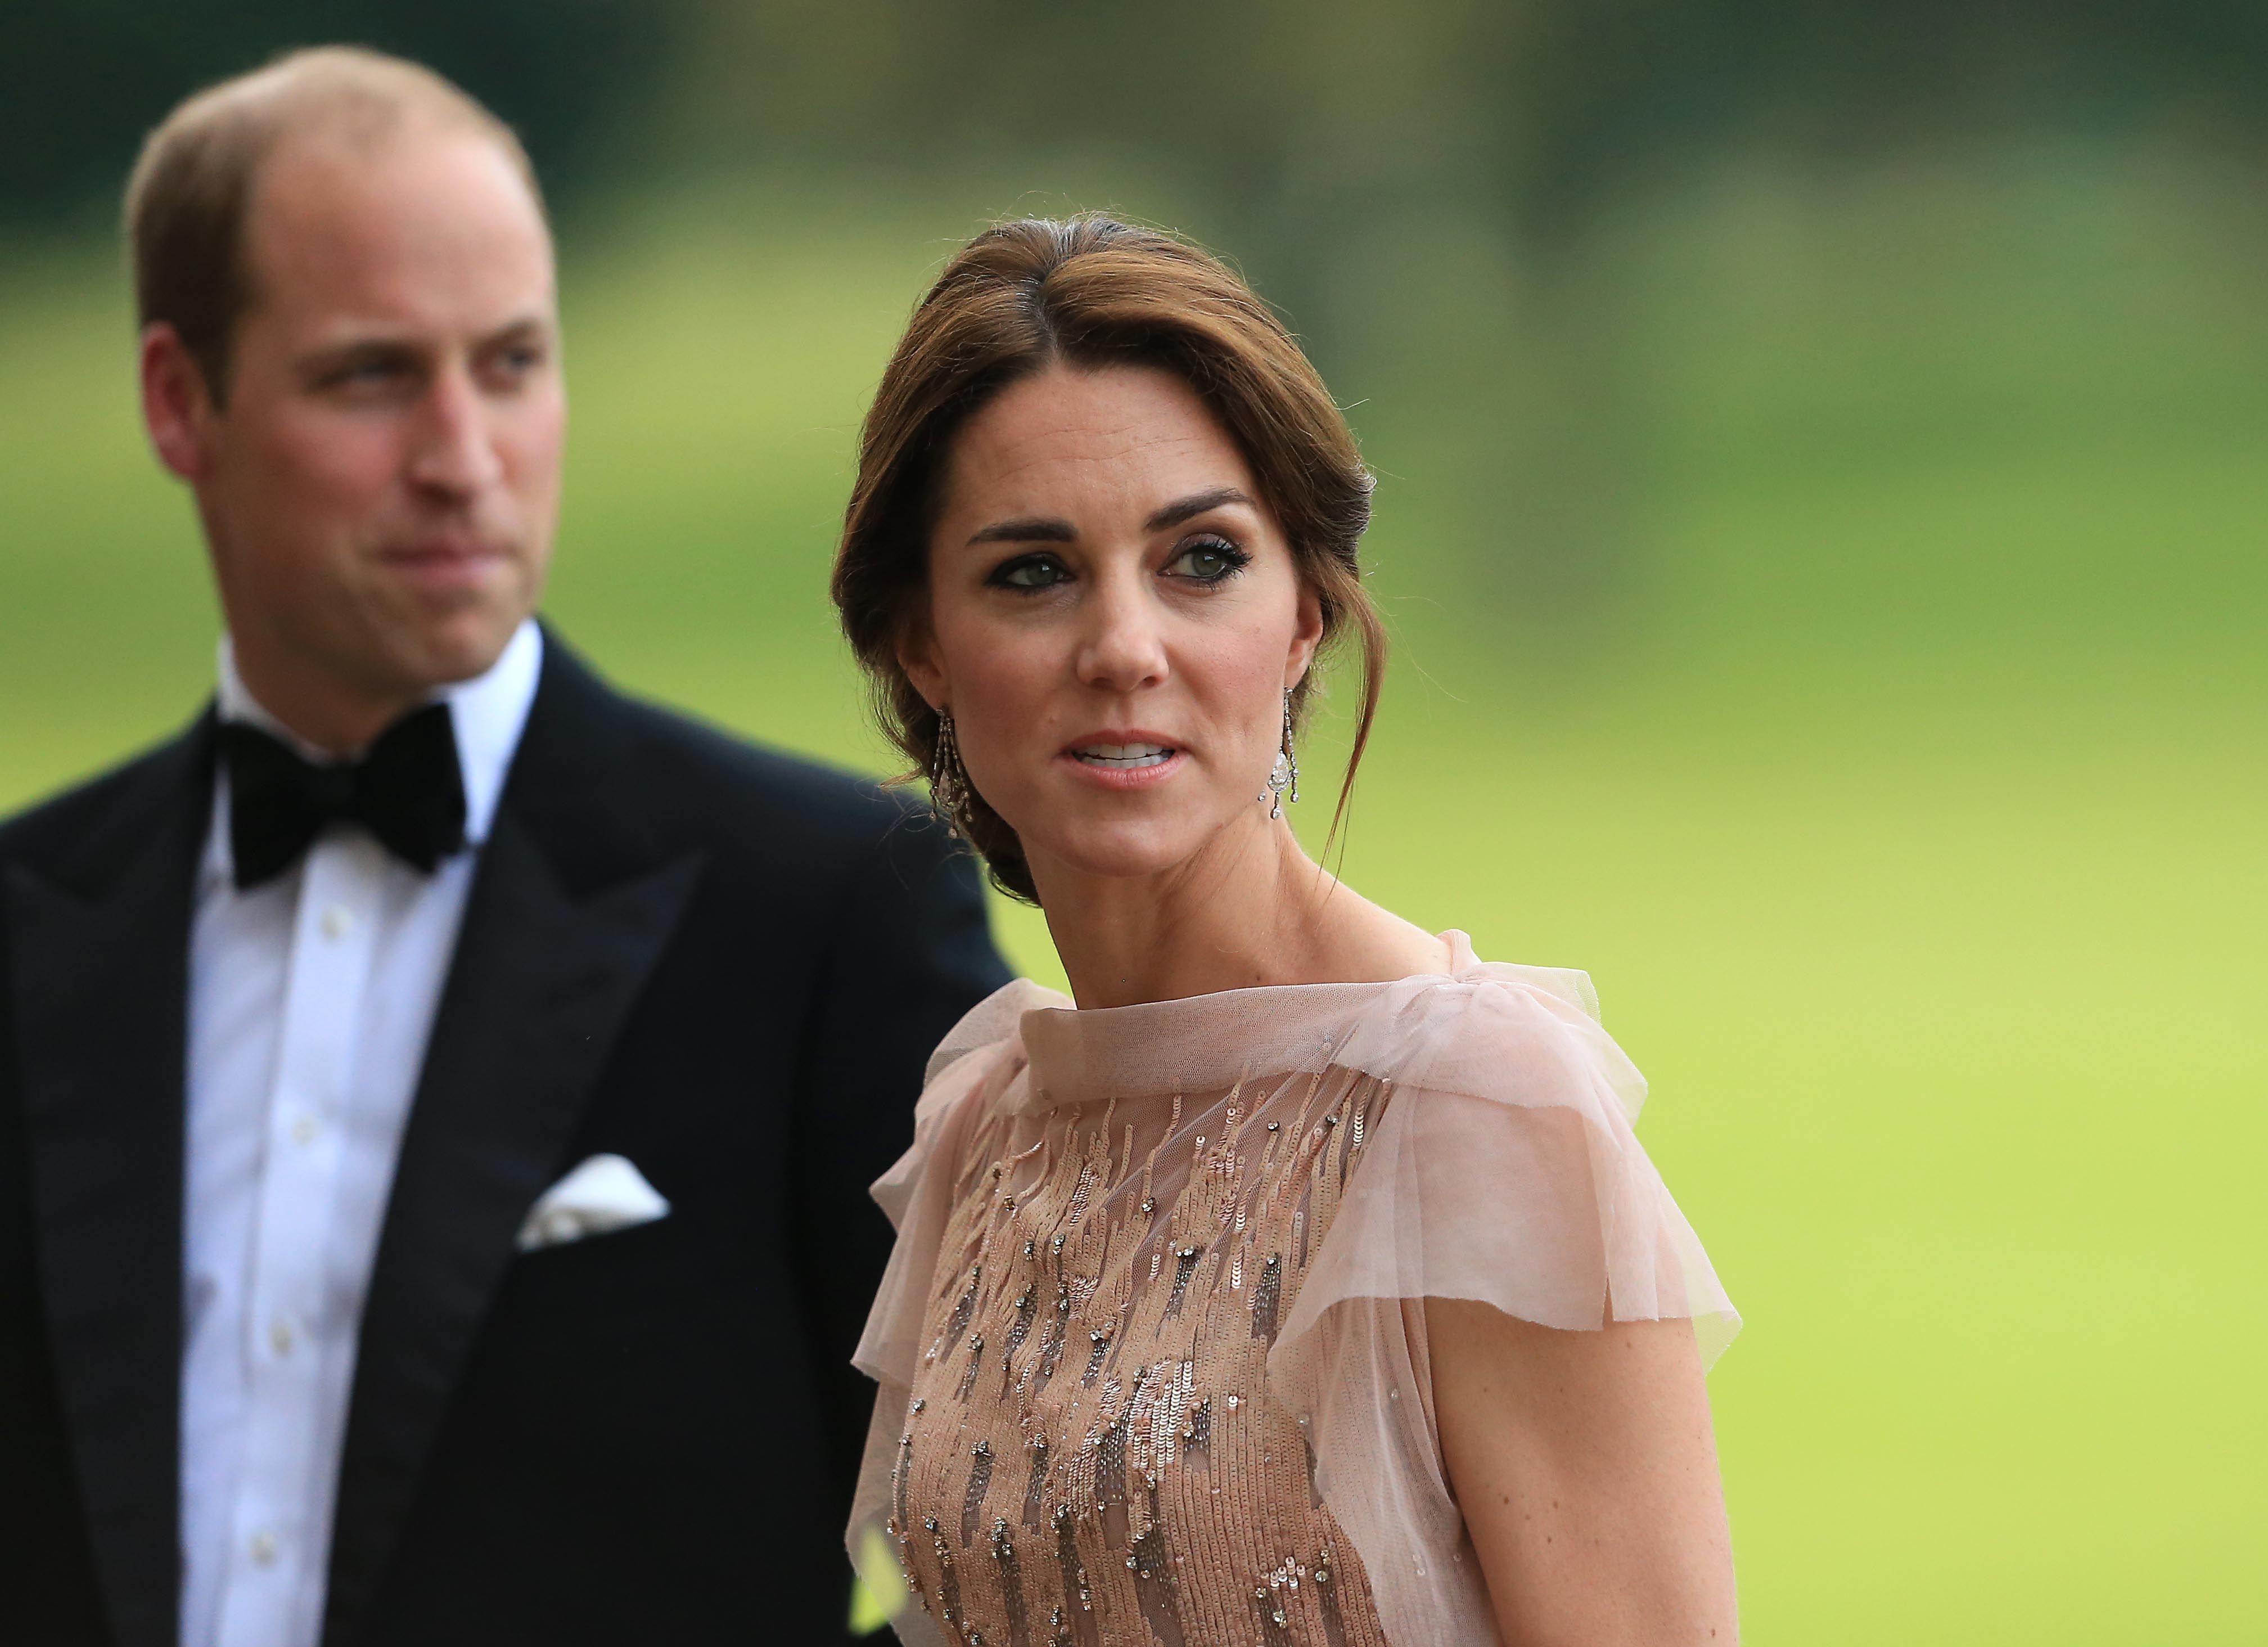 Revealed: Why Kate Middleton was left in tears during bridesmaid